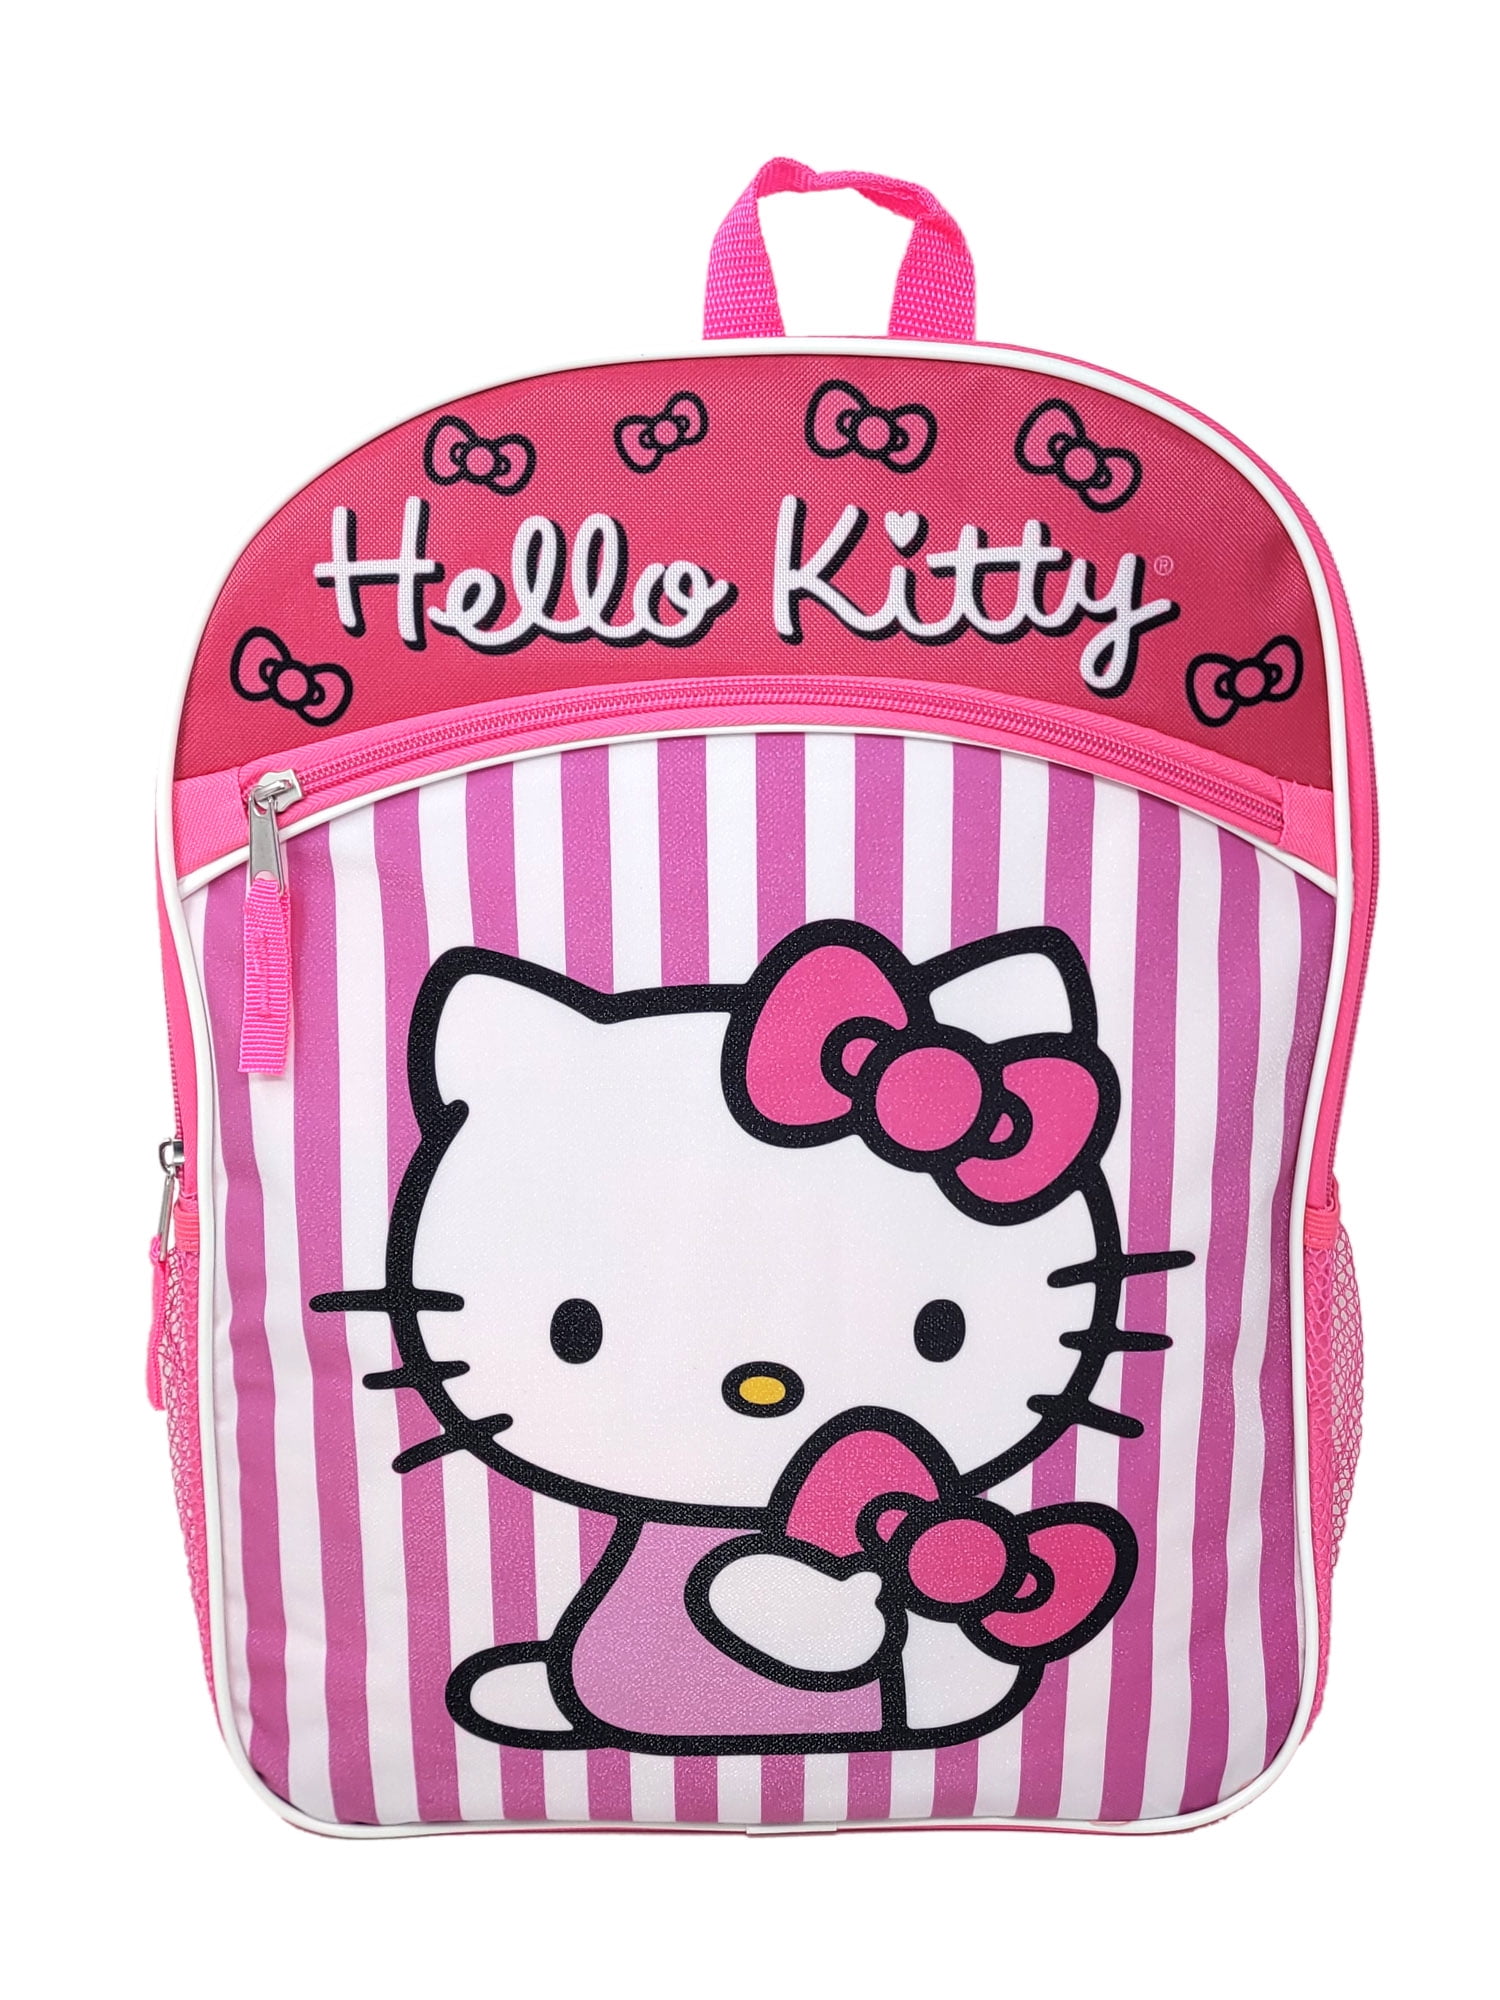 Hello Kitty Pink Zippered Tote Bag | Hello Kitty Girls Clothes